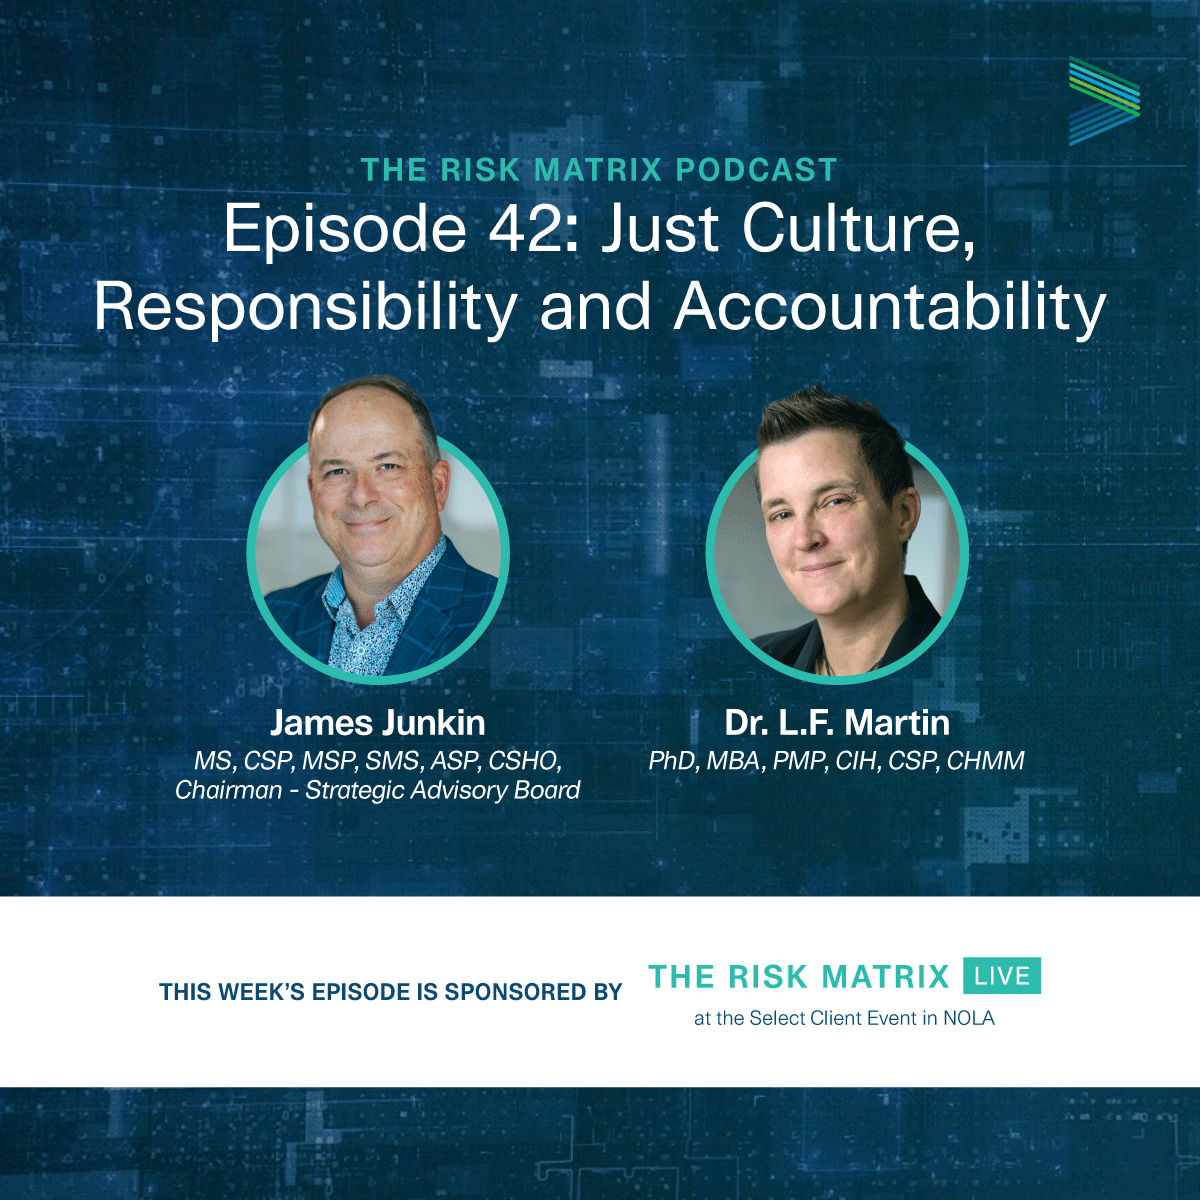 The Risk Matrix podcast is tackling the hot topic of 'Just Culture, Responsibility, and Accountability'! Striking that perfect balance between fairness and accountability.But here's the million-dollar question: What happens if you don't get it right? veriforce.com/resource/just-…